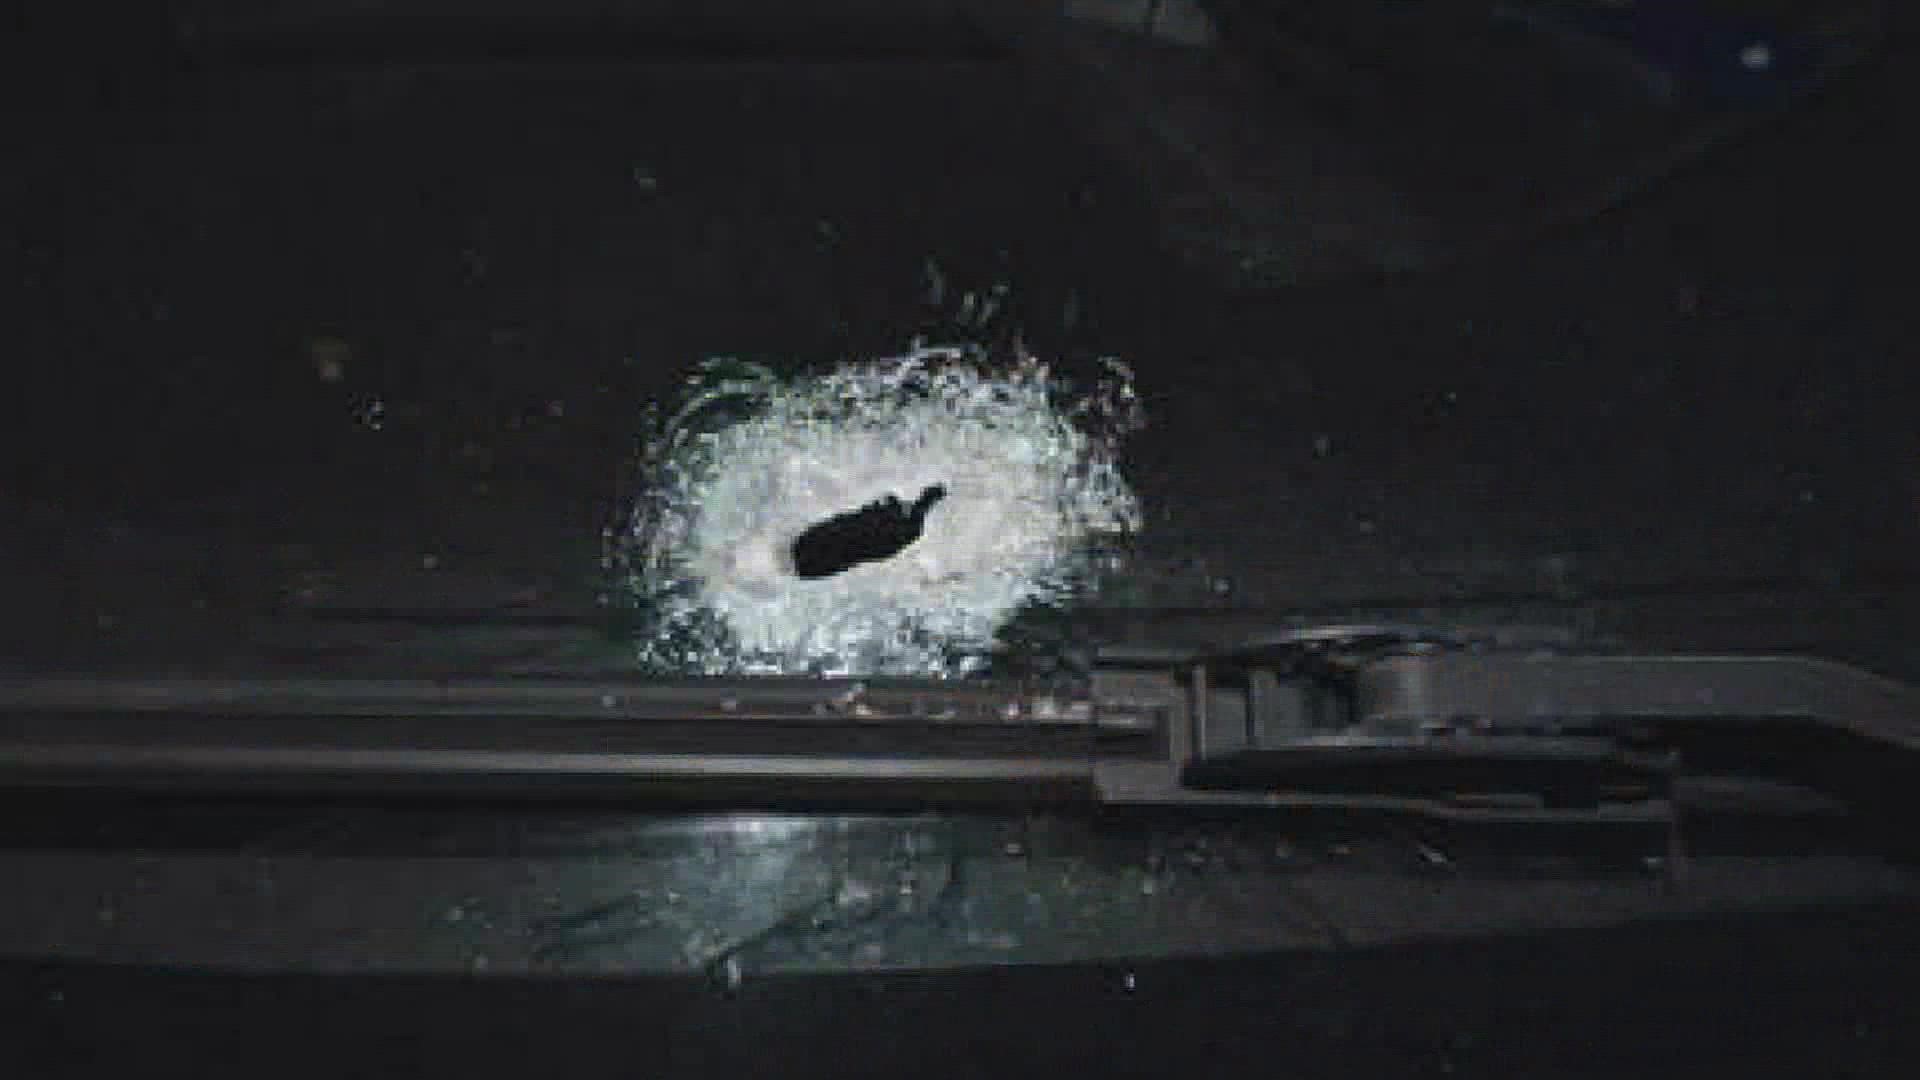 Some of the shots were fired at a police unit and other cars at the apartment complex.